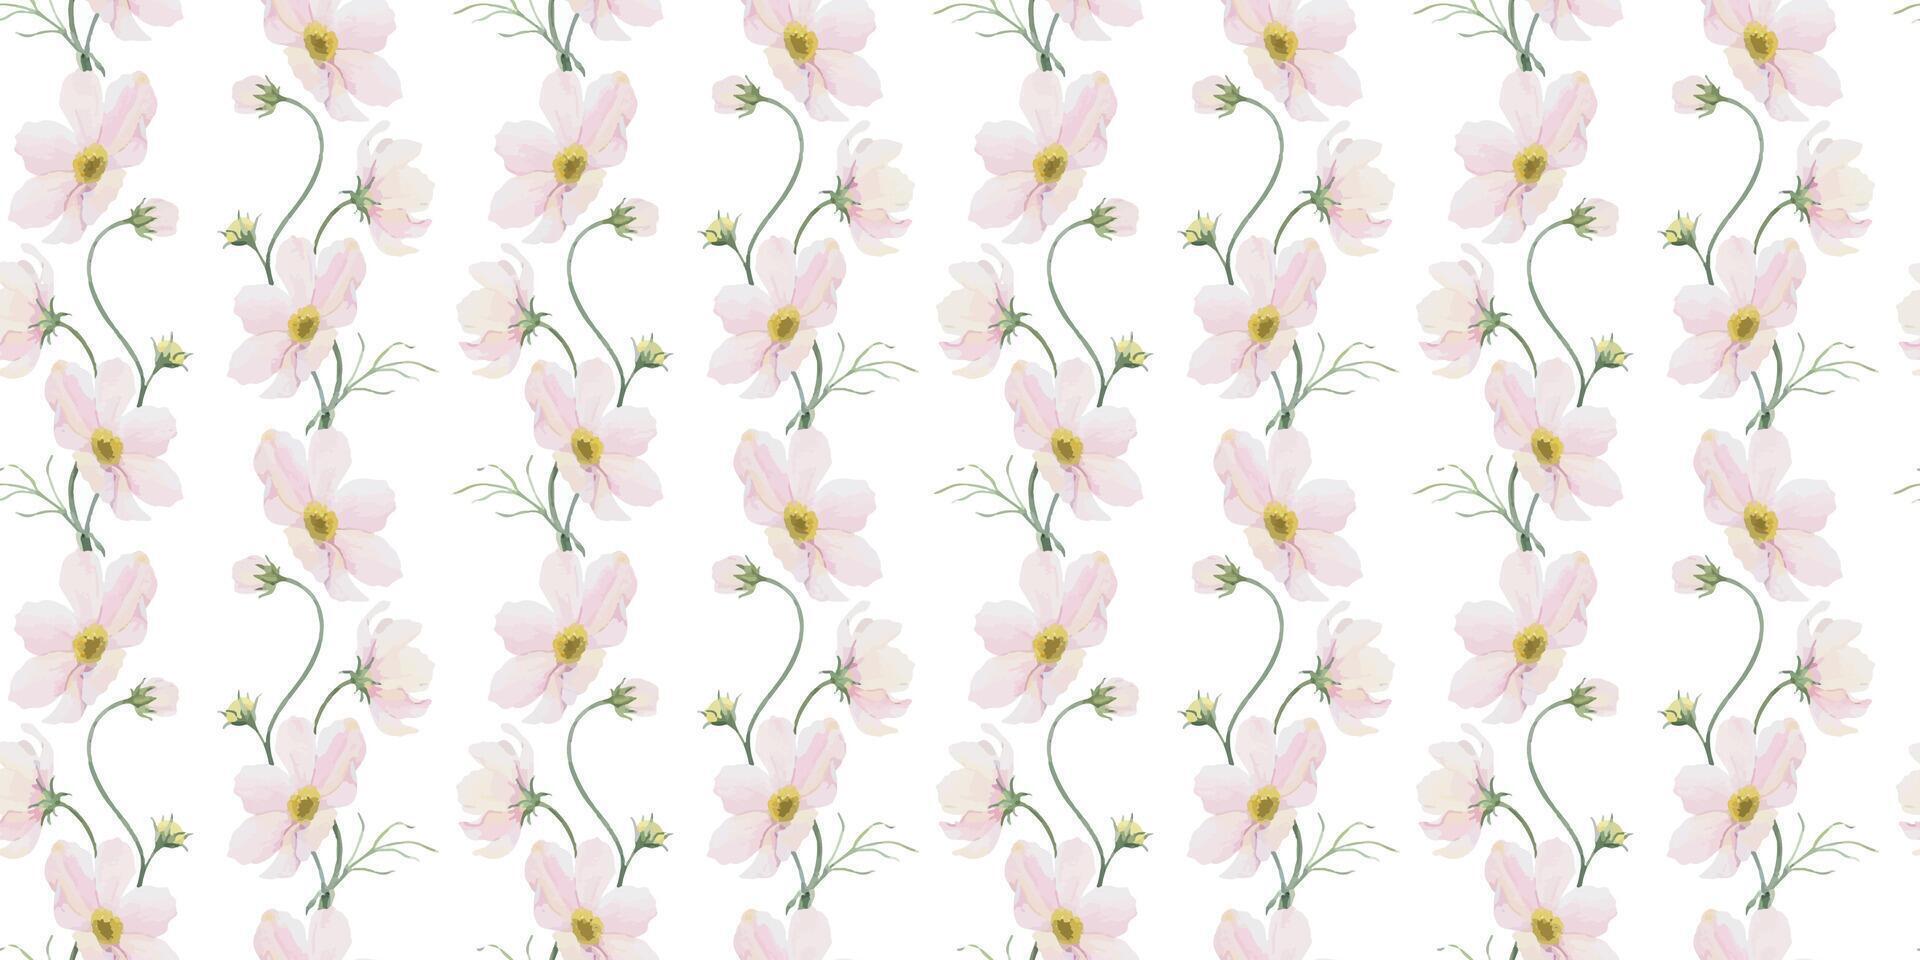 Print of pink and white Cosmea flowers. Cosmos bipinnatus. Hand drawn watercolor seamless pattern of Mexican aster. Summer floral background for wedding design, textiles, wrapping paper, scrapbooking vector